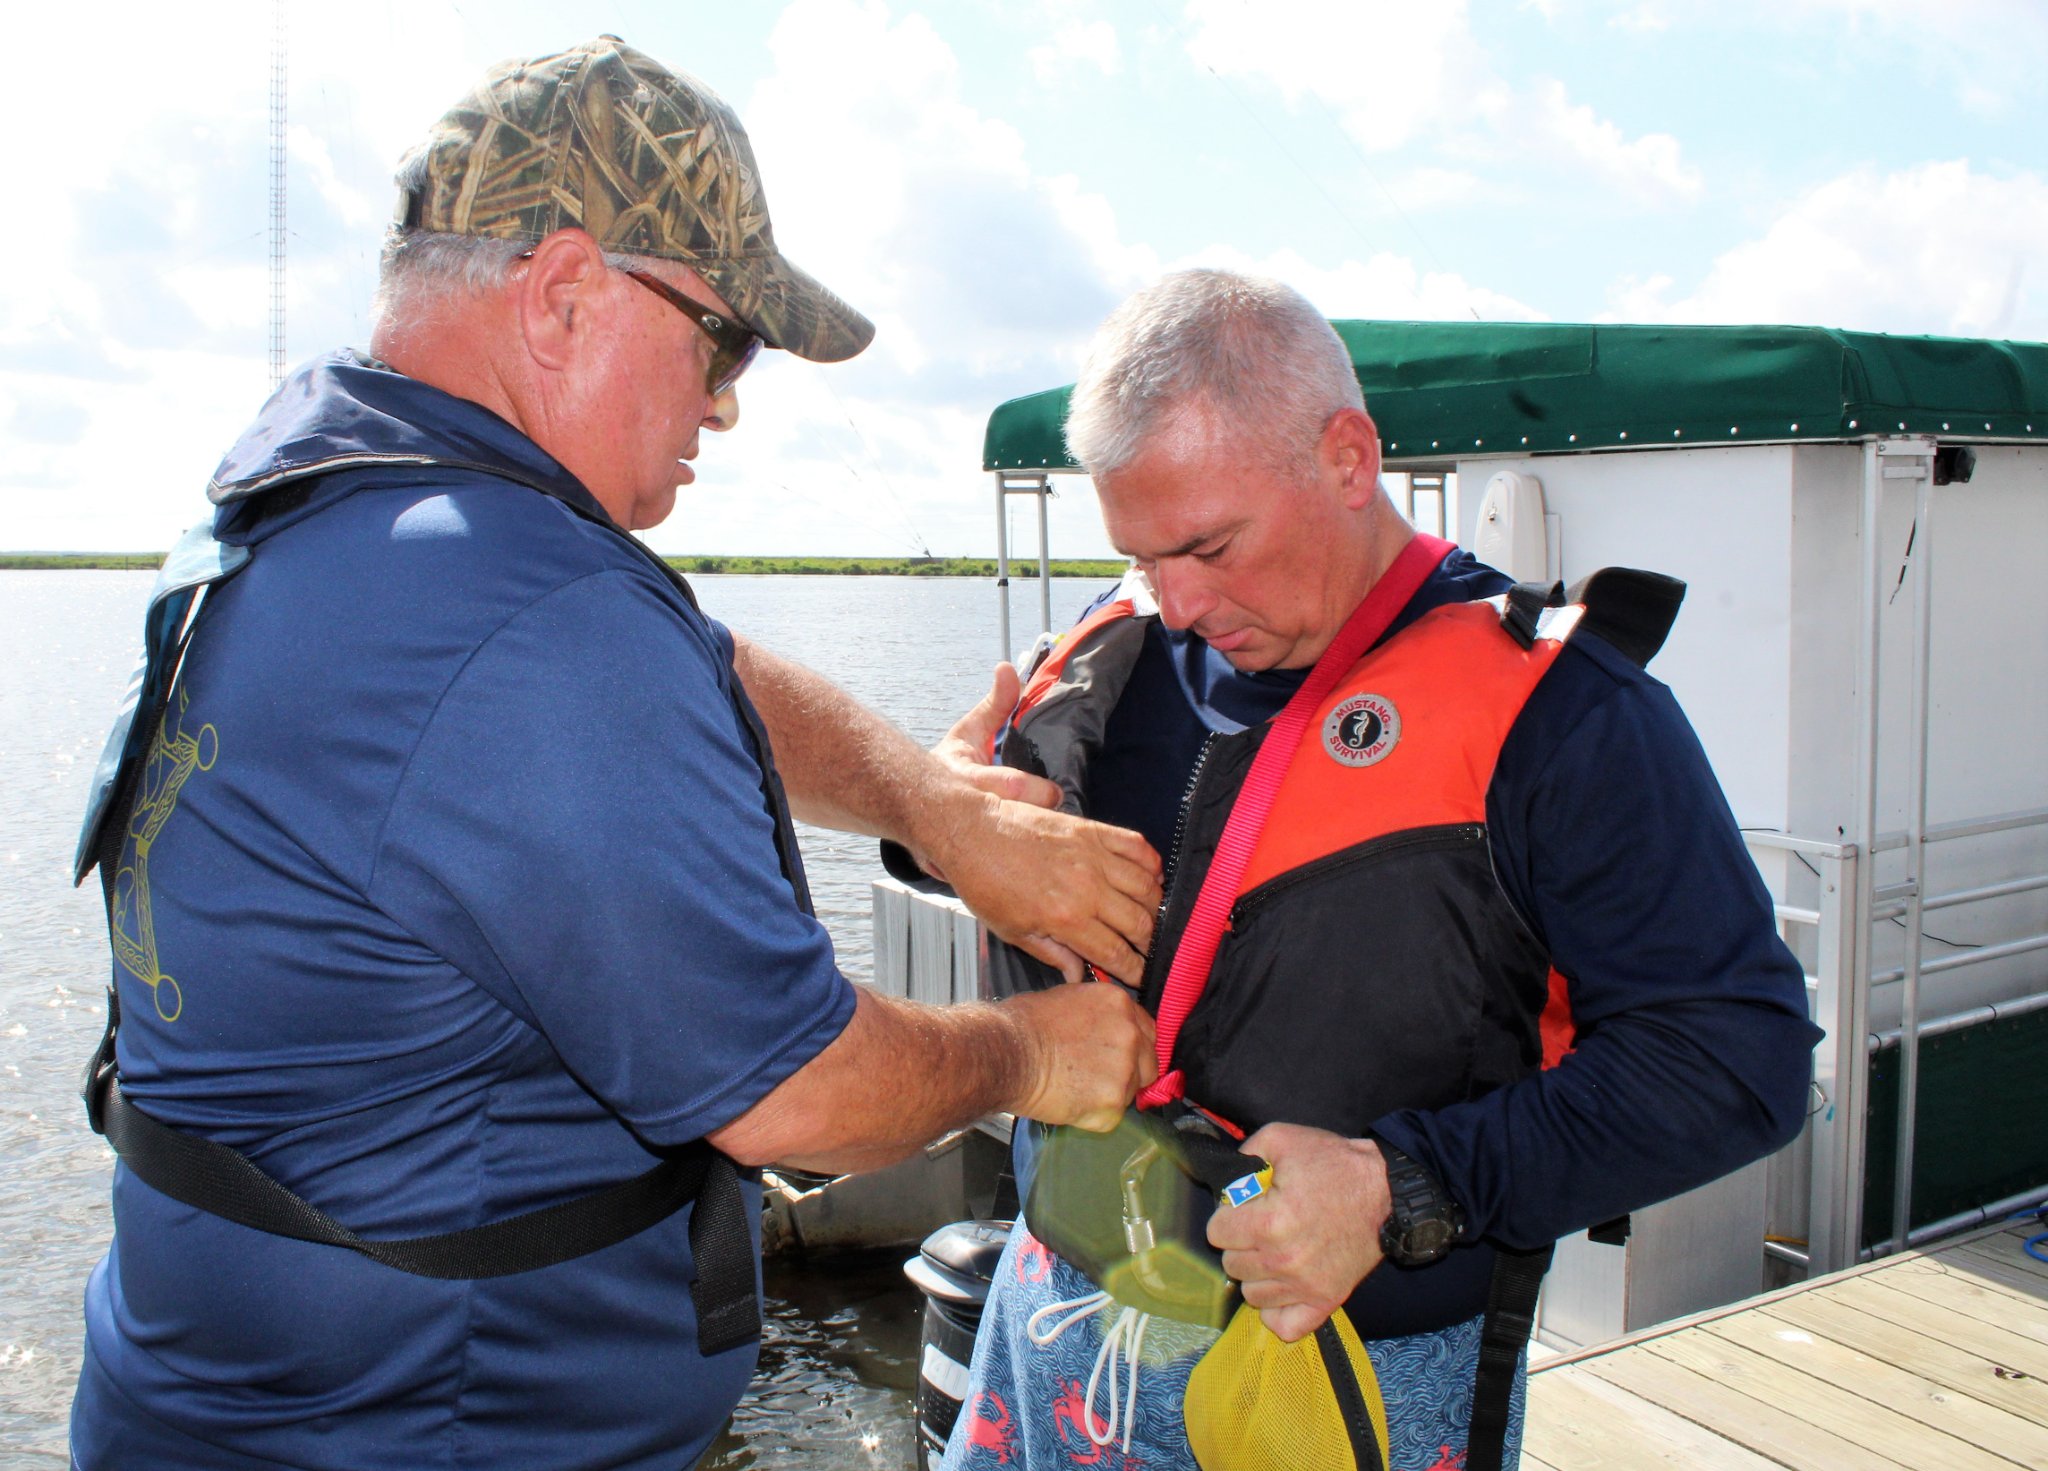 SBSO PROMOTES BOATING SAFETY